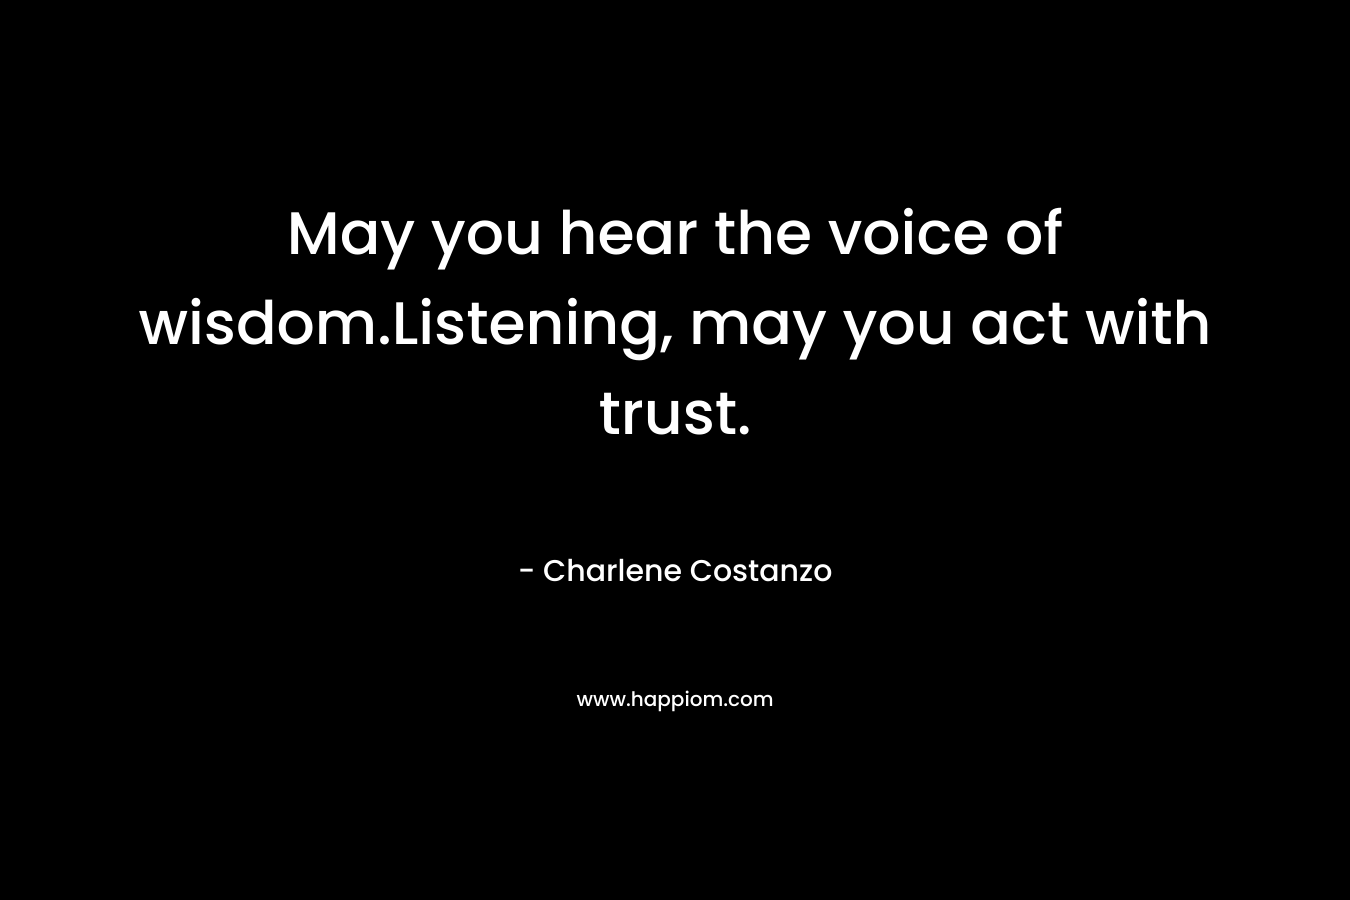 May you hear the voice of wisdom.Listening, may you act with trust. – Charlene Costanzo